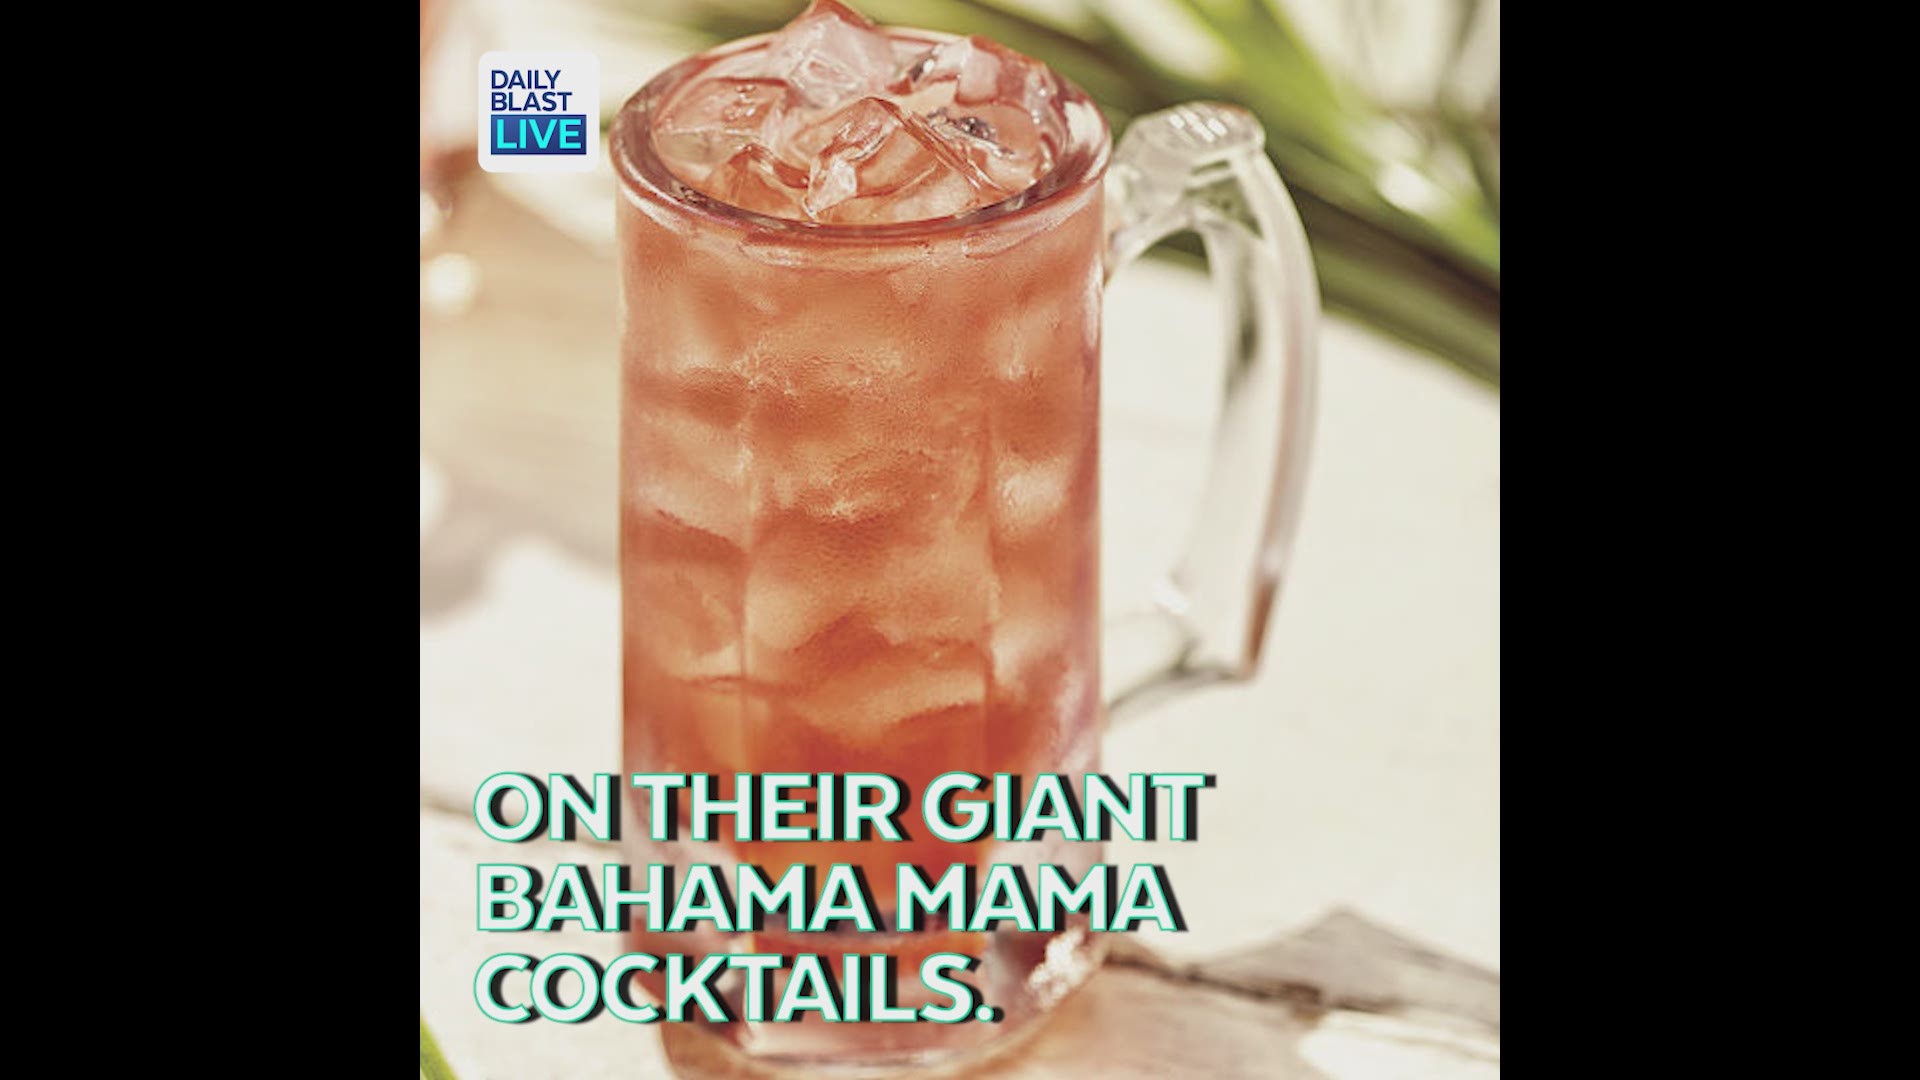 Applebee's is at it again with $1 cocktails! 